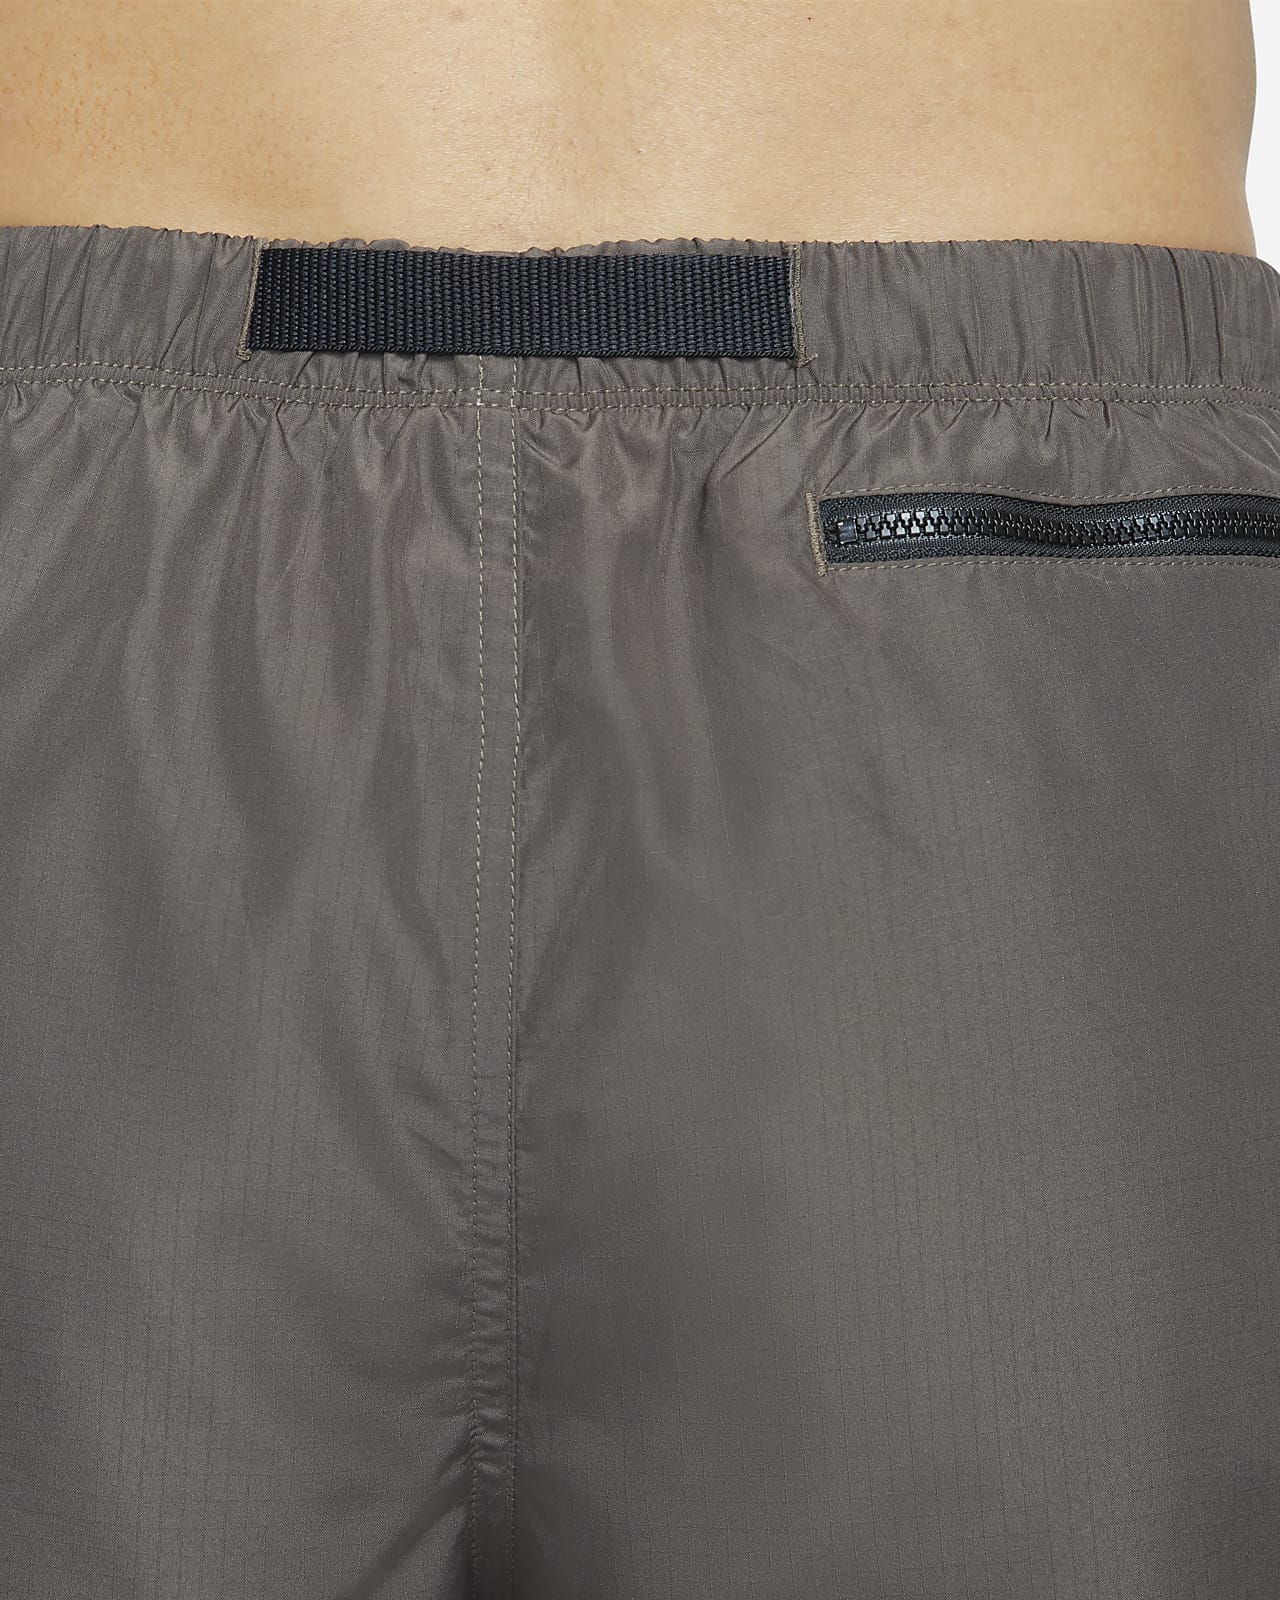 Nike Men's 13cm (approx.) Belted Packable Swimming Trunks. Nike UK